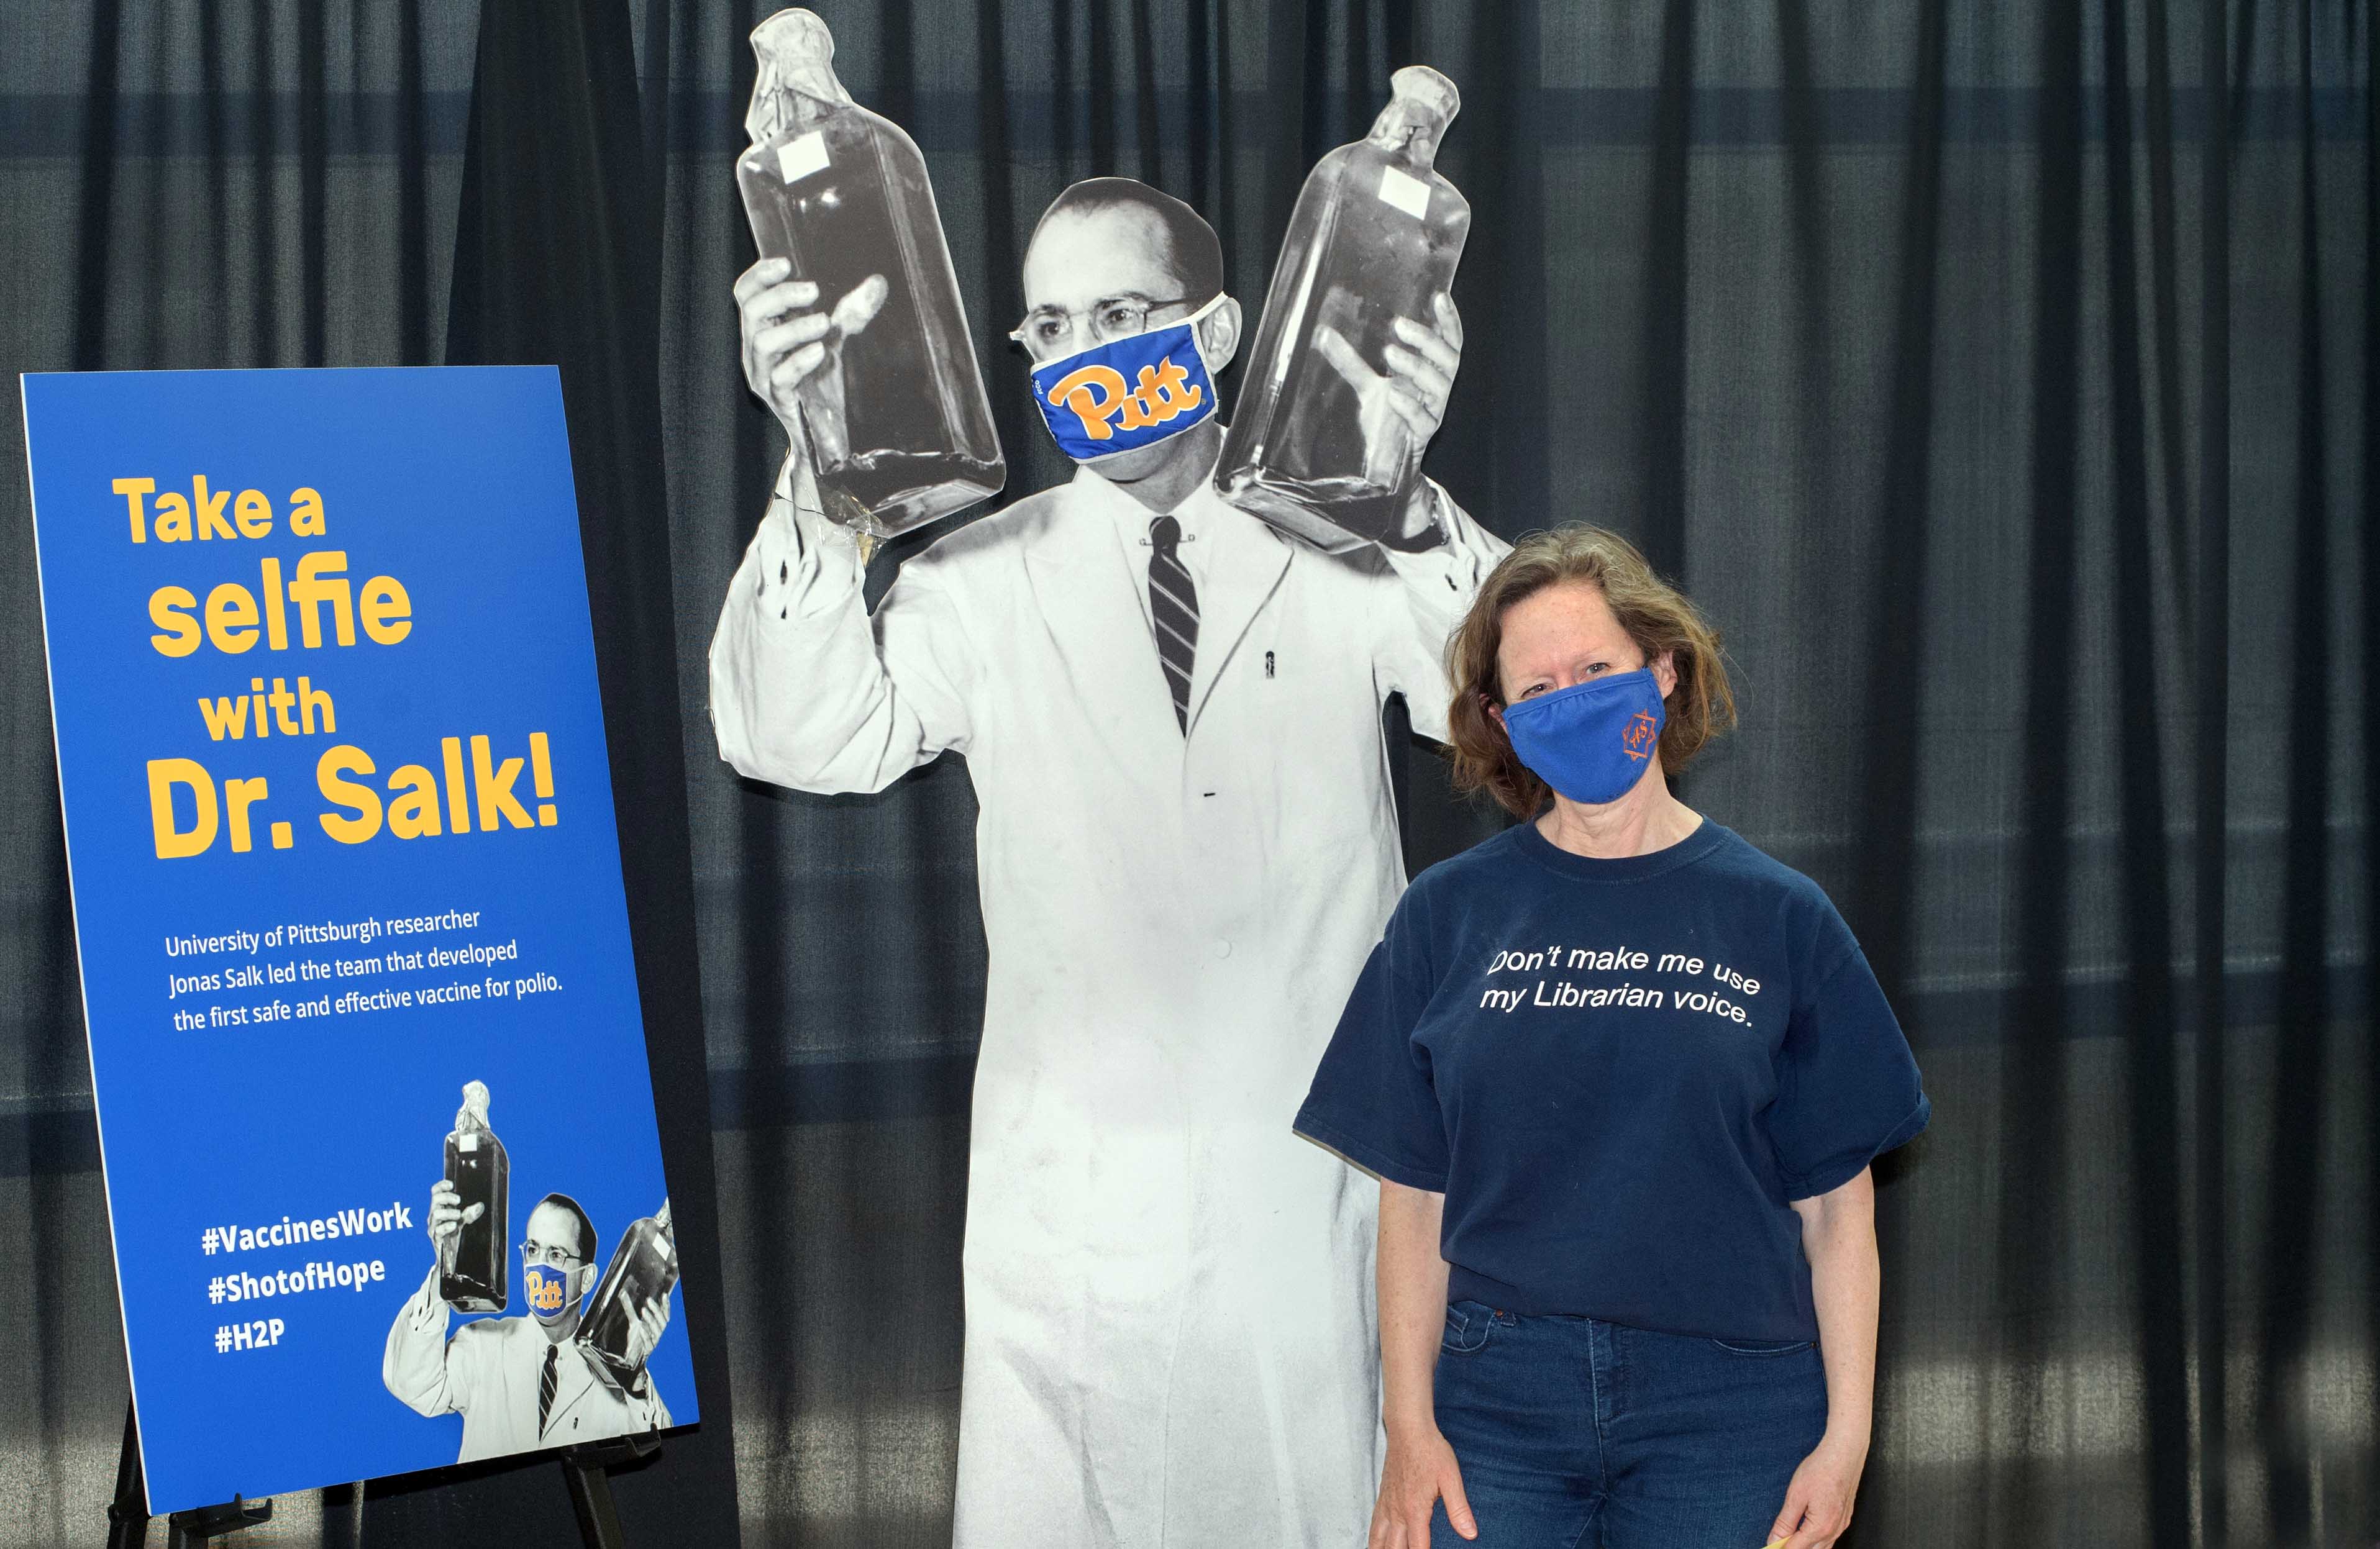 Woman in mask standing next to cutout of Dr. Salk